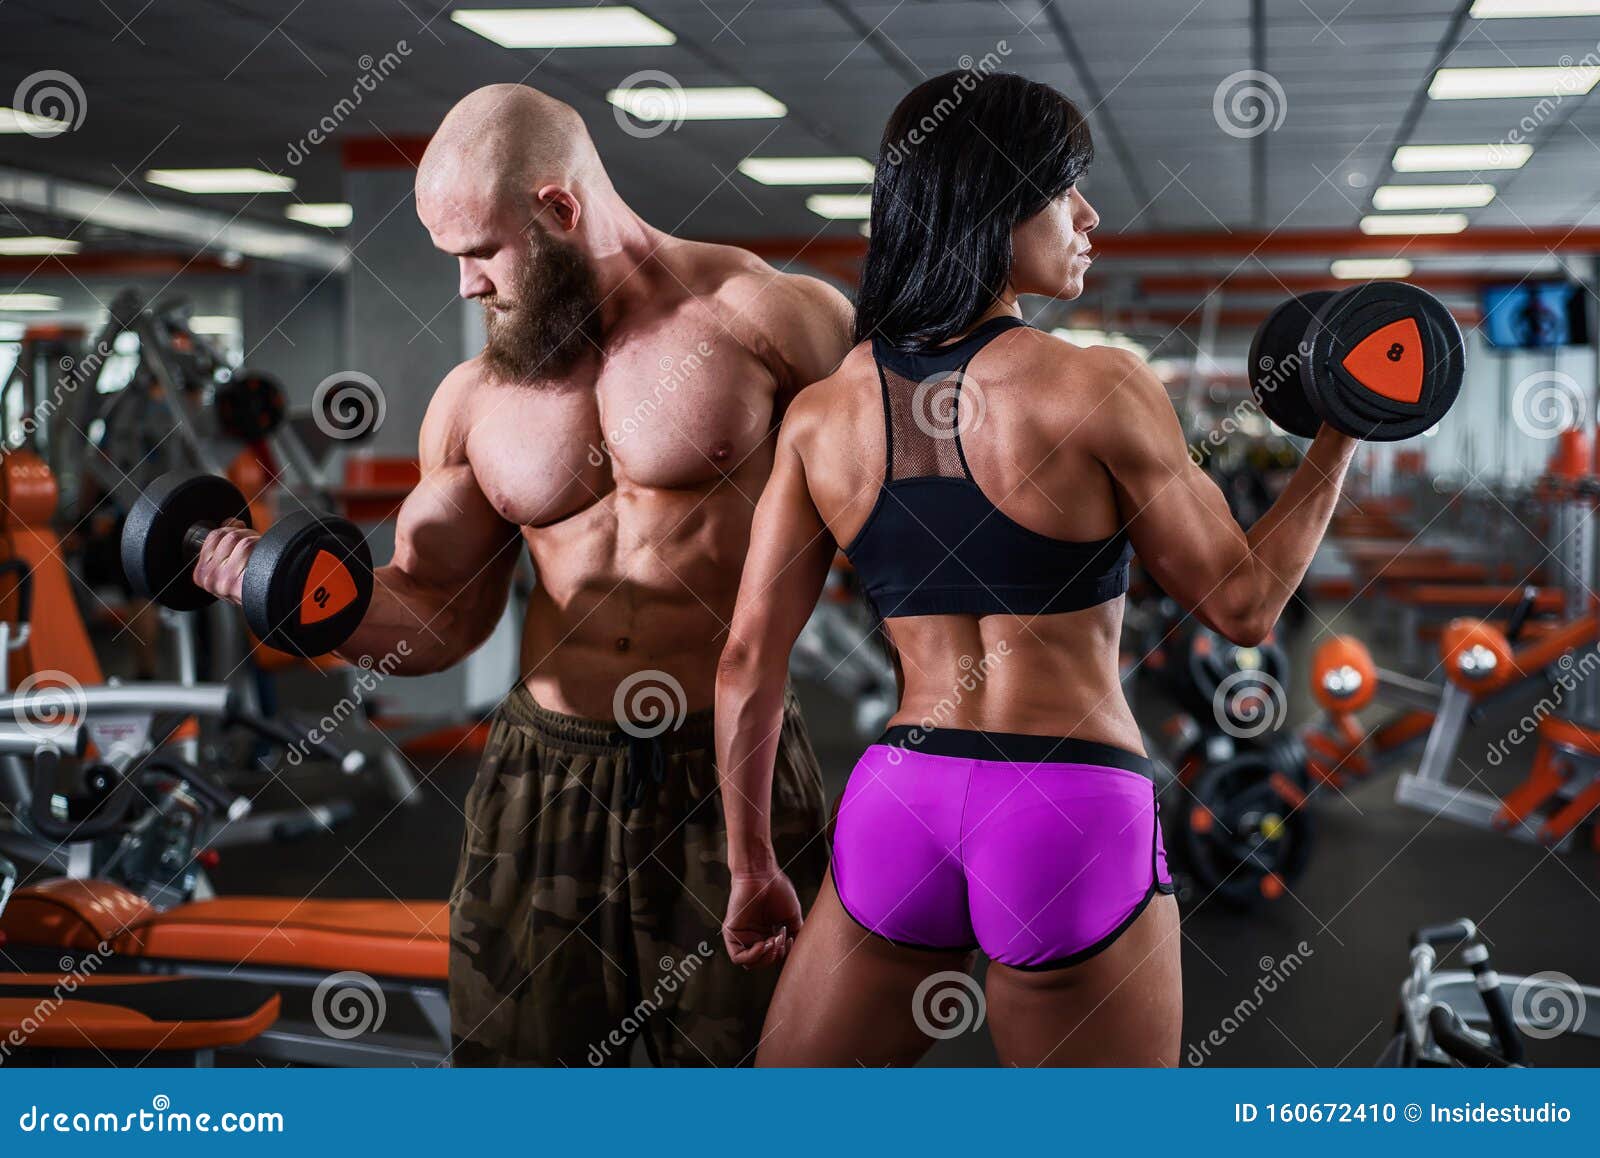 Powerful Muscular Strong Man And Woman Pick Up The Dumbbell With